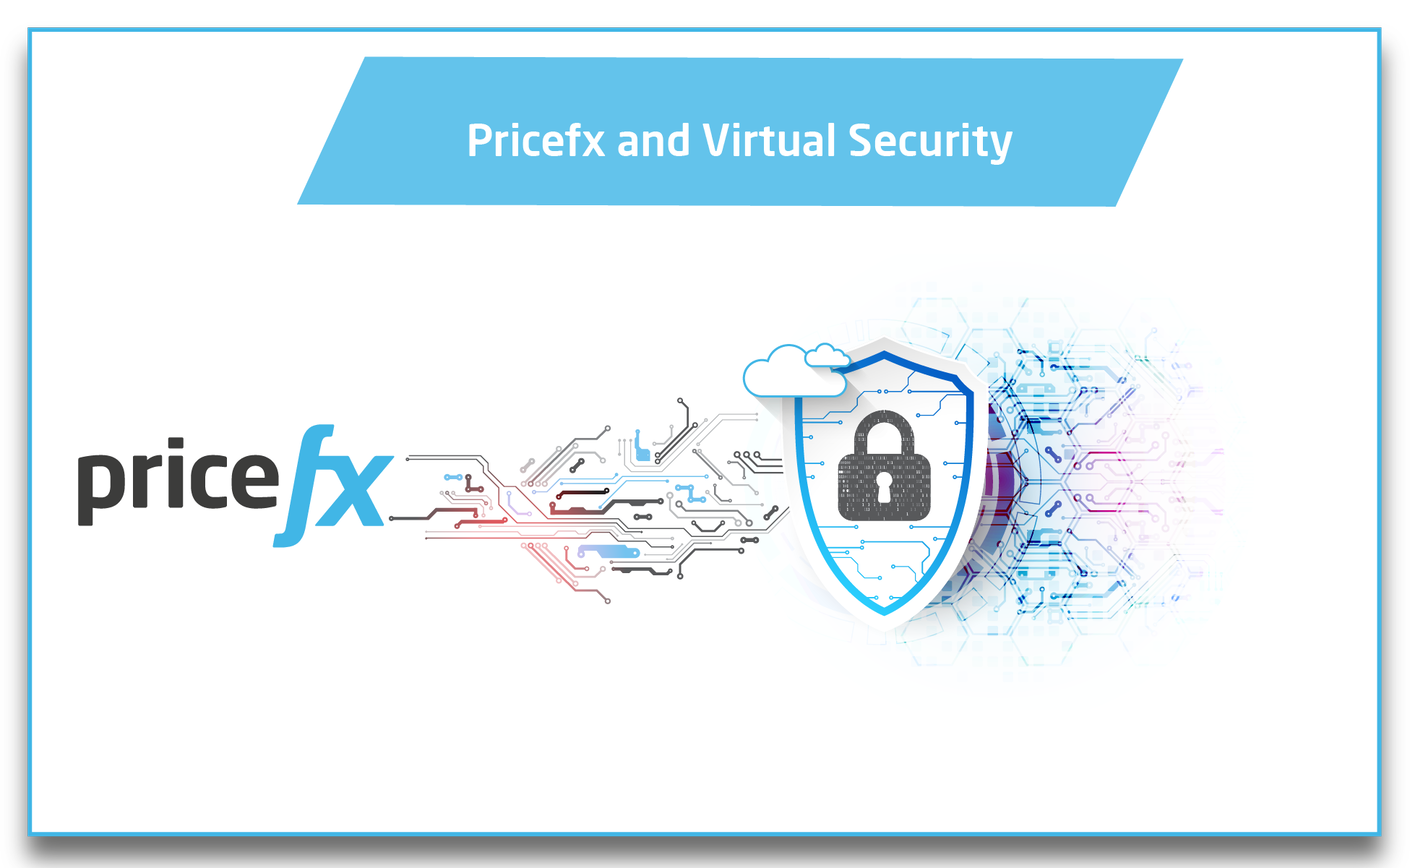 Pricefx-Virtual-Security-Servers-Lock-and-Key-Security-on-Touchscreen